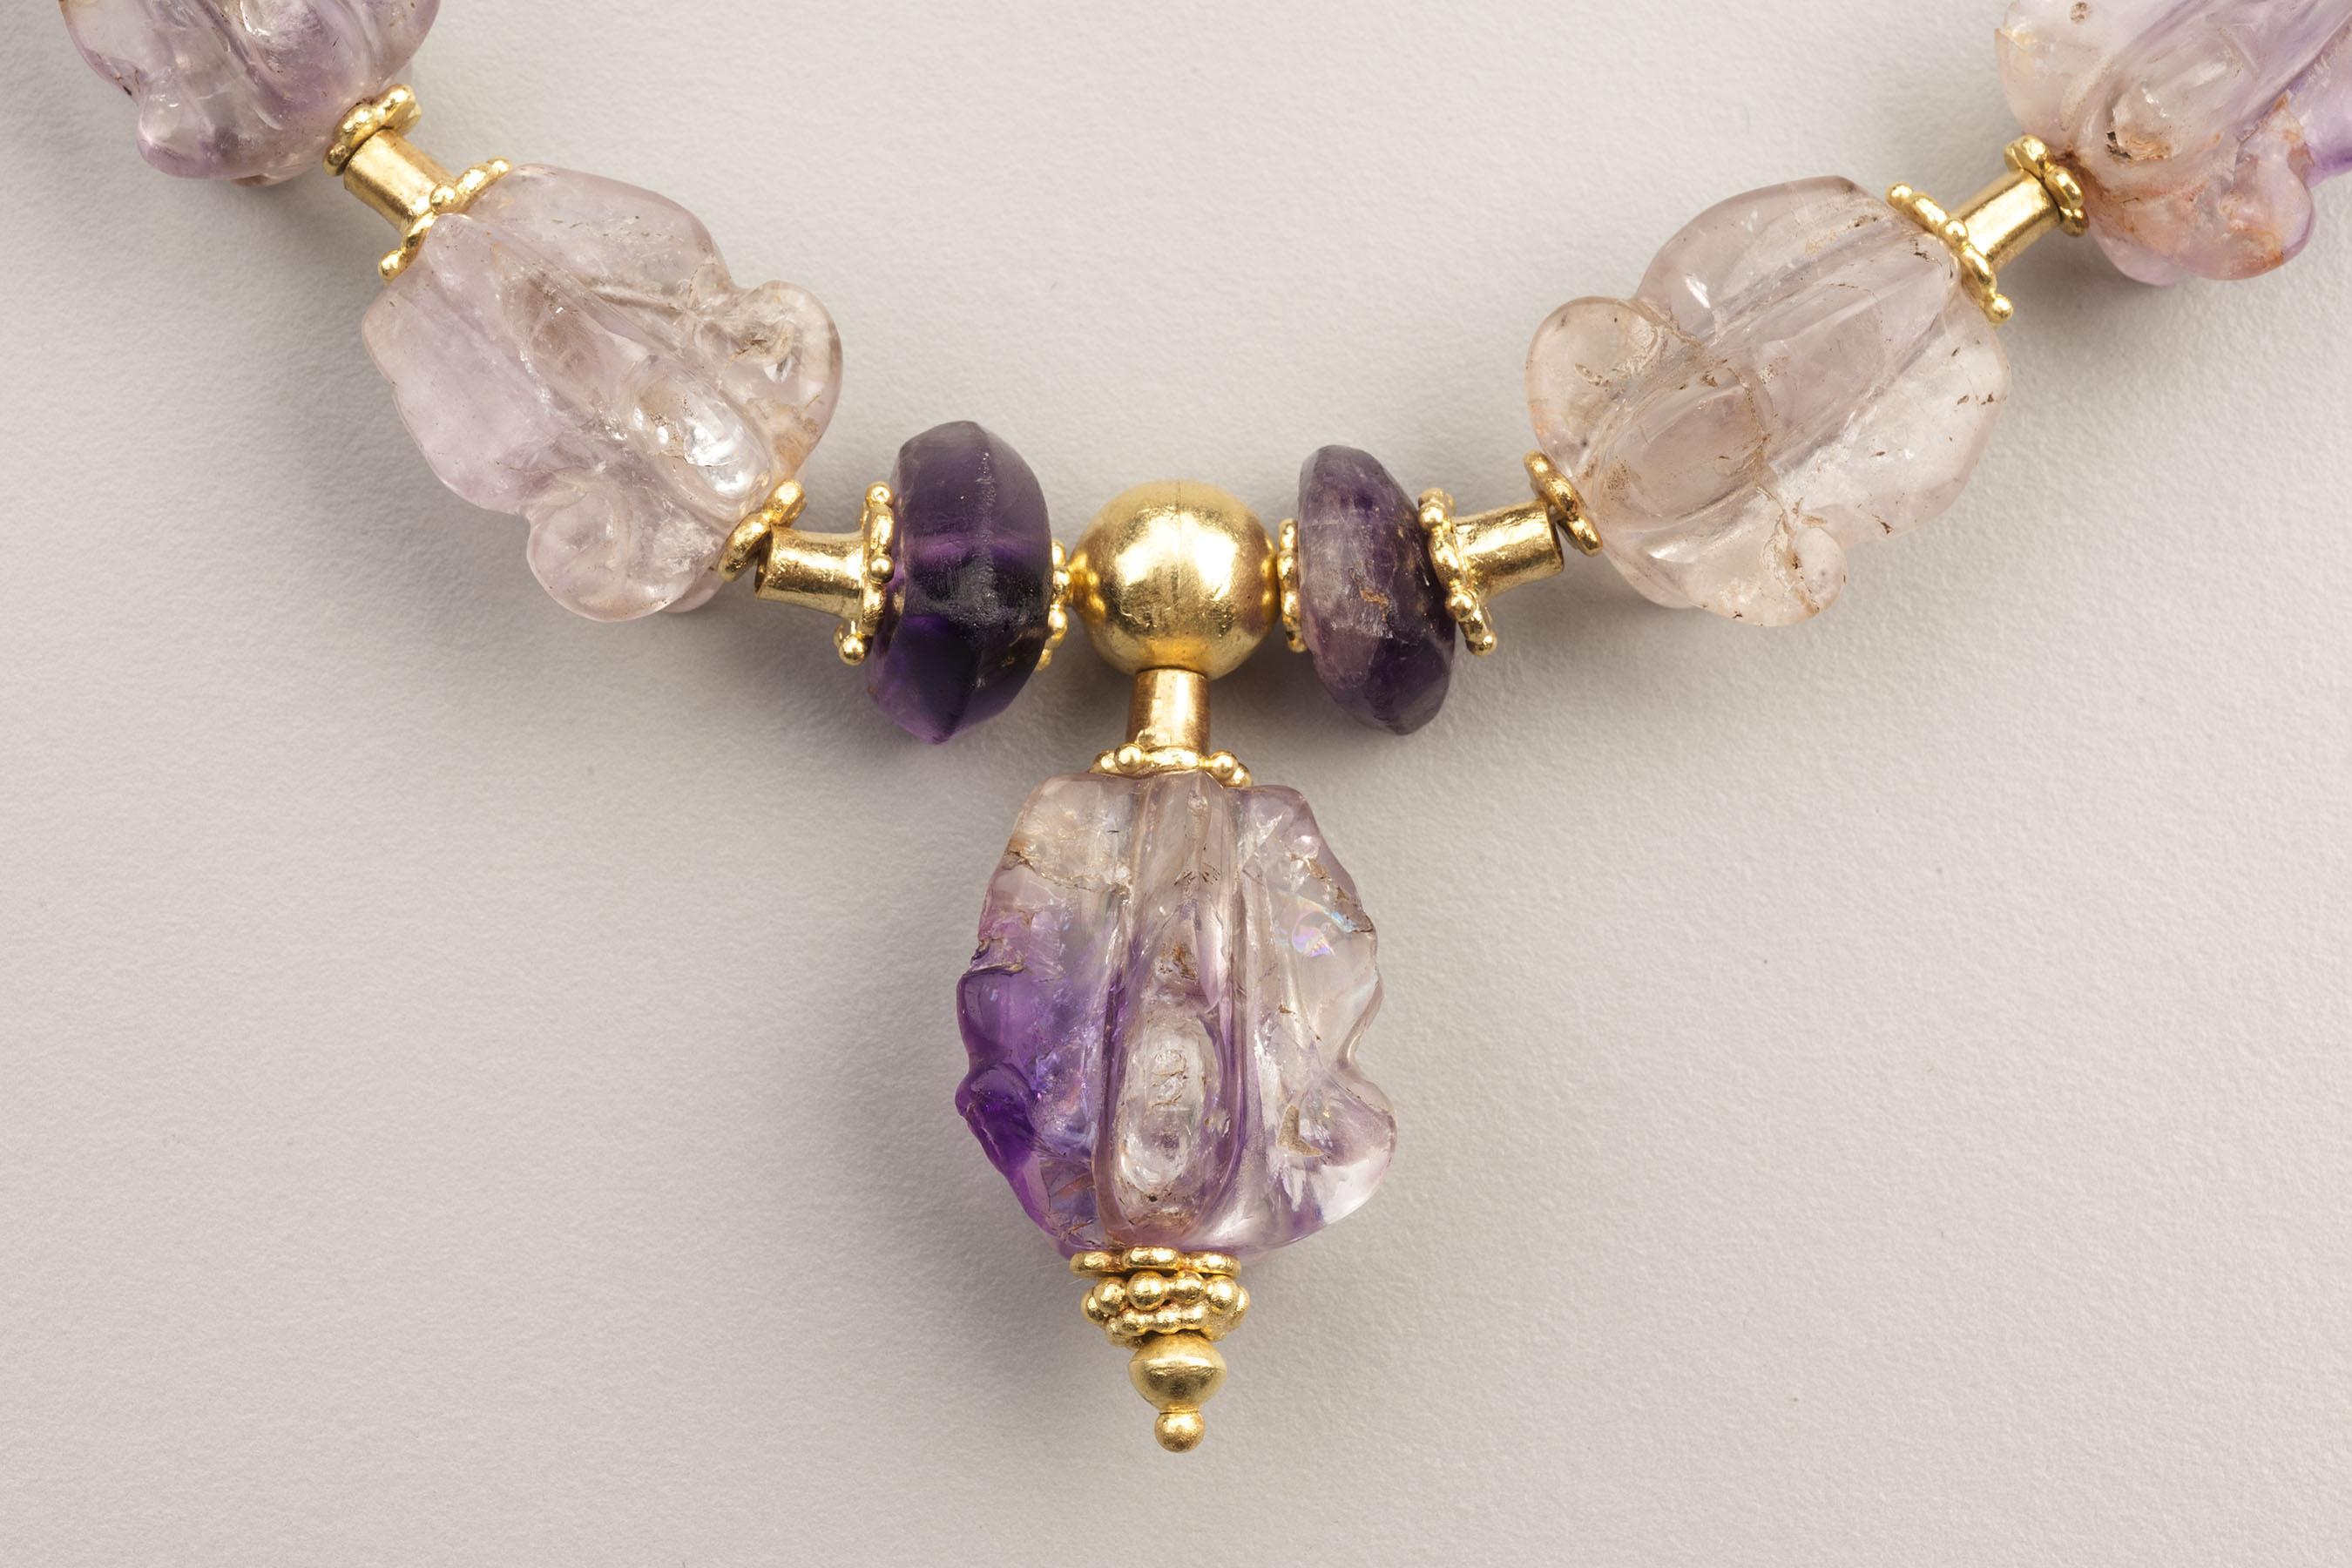 Twenty-three amethyst beads carved in the form of Crown flowers with five ridged lobes that flare on one end. There are four beveled triangular amethyst beads, two at the back of the necklace and two in the front on either side of the pendant bead. 